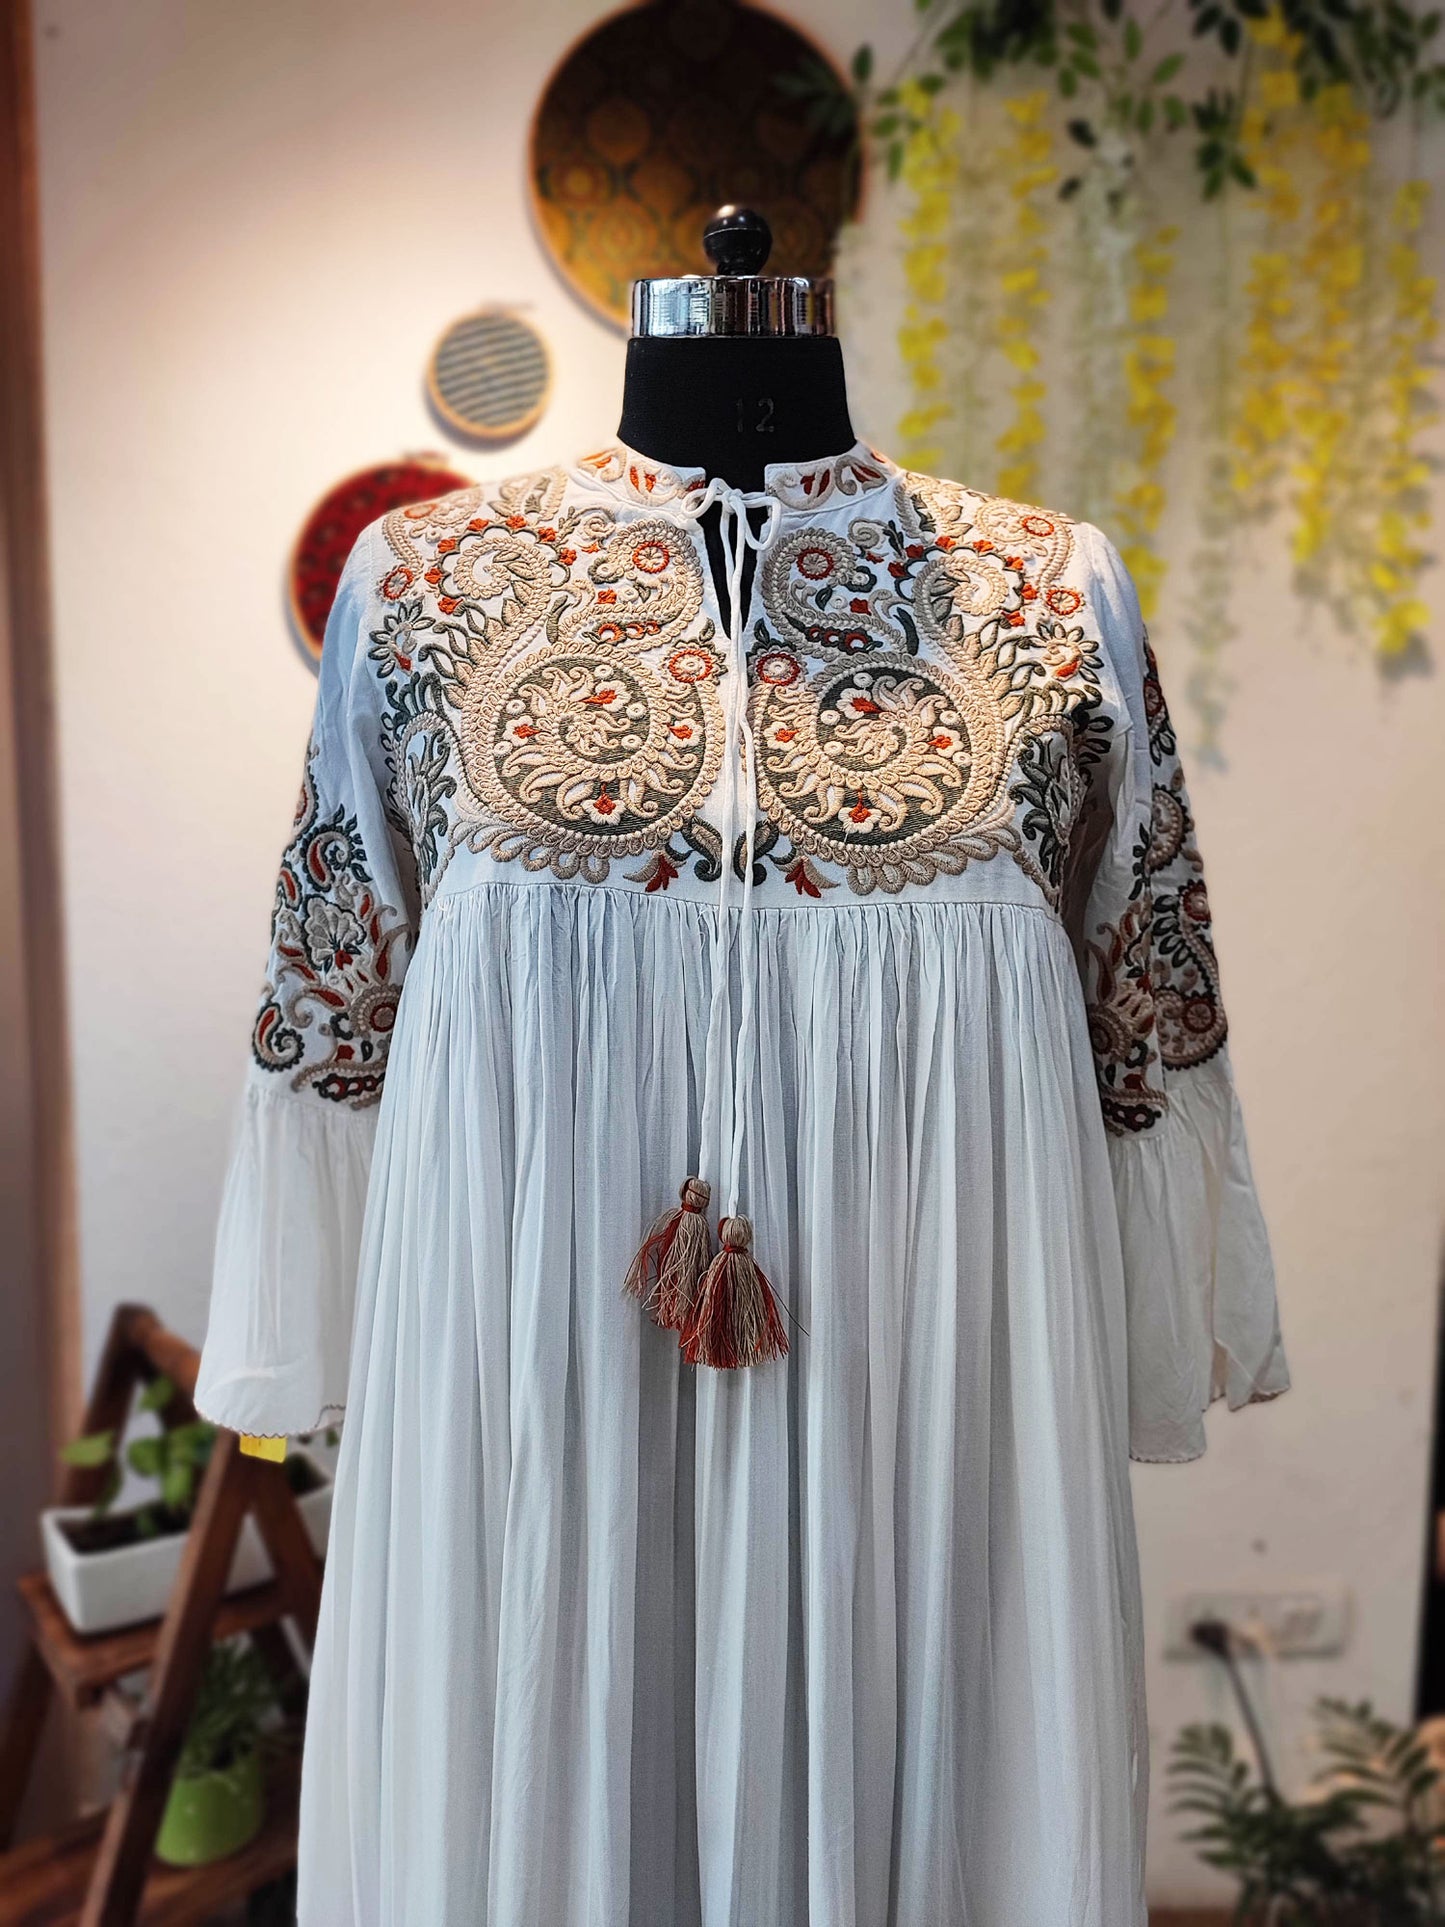 White Cotton Dress With Ornate Embroidery